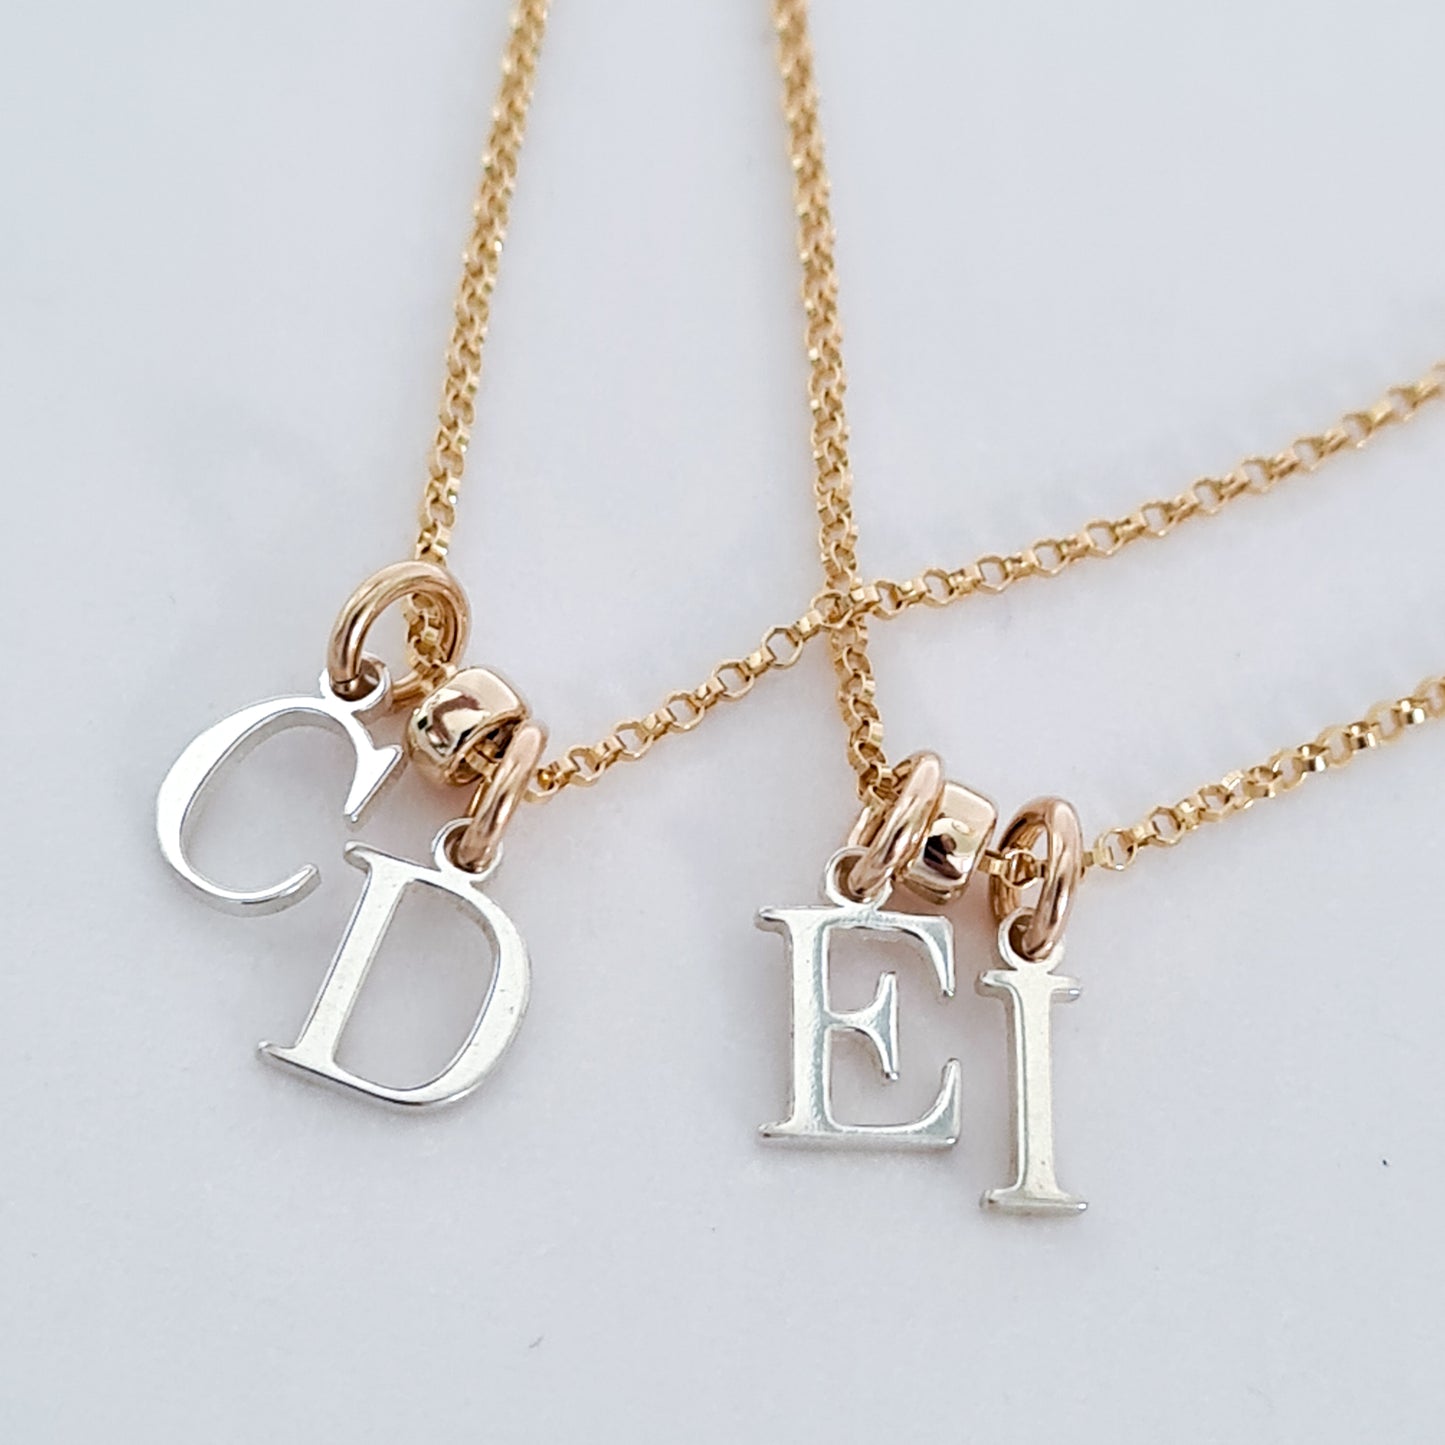 Gold Necklace - Silver Initials